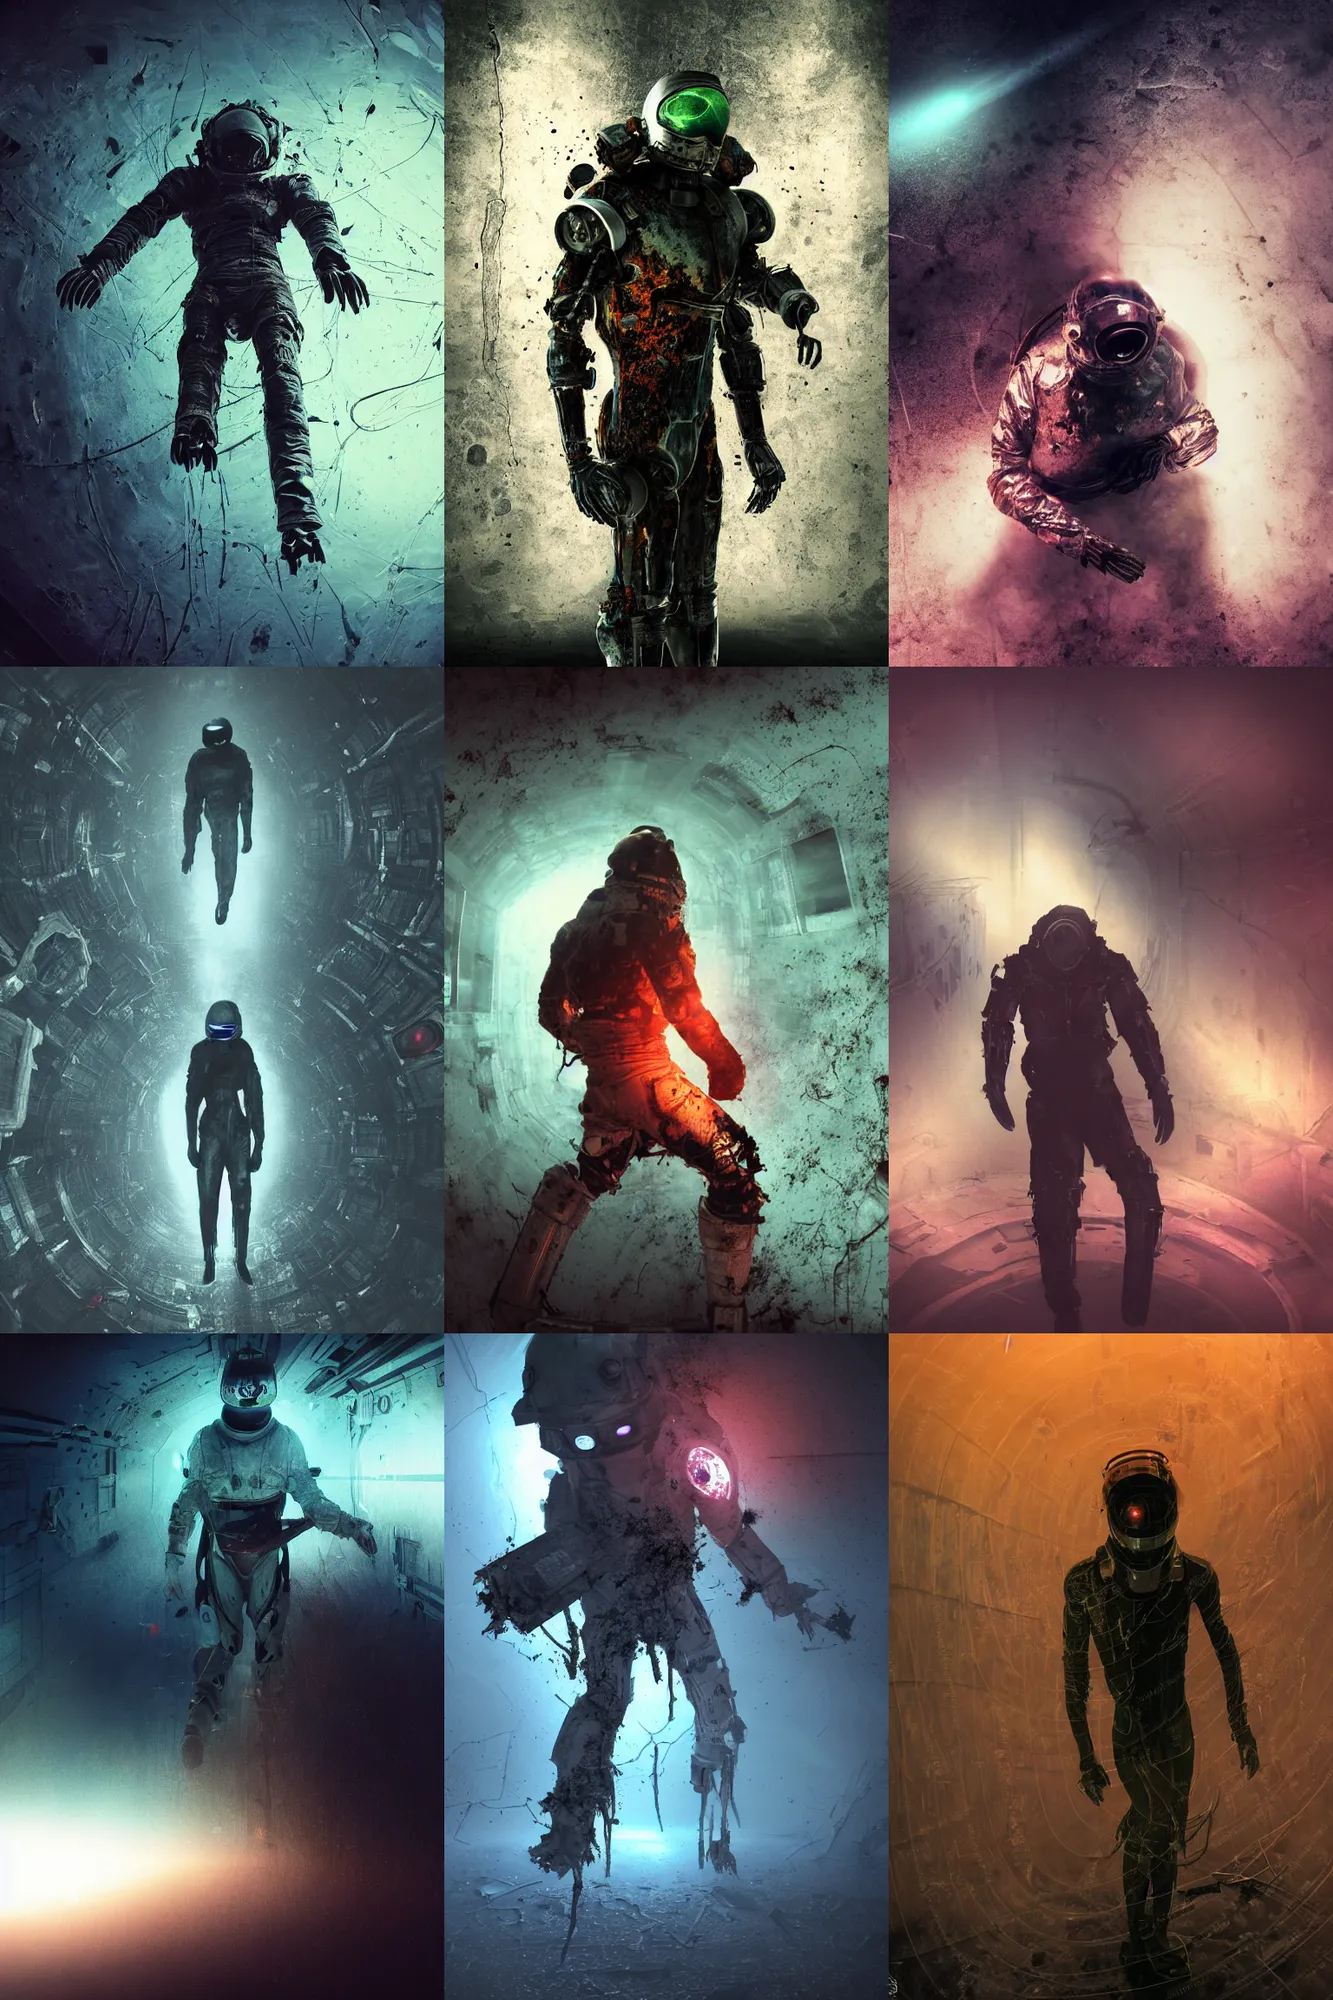 Prompt: horror movie scene with moody colors of an individual in futuristic space suit walking through a broken down deep space mining space station, full body character portrait, the walls are broken and twisted metal, birds eye view, dark colors, rusting metal adorns the walls, tense atmosphere, misty floats through the air, amazing value control, dead space, moody colors, dramatic lighting